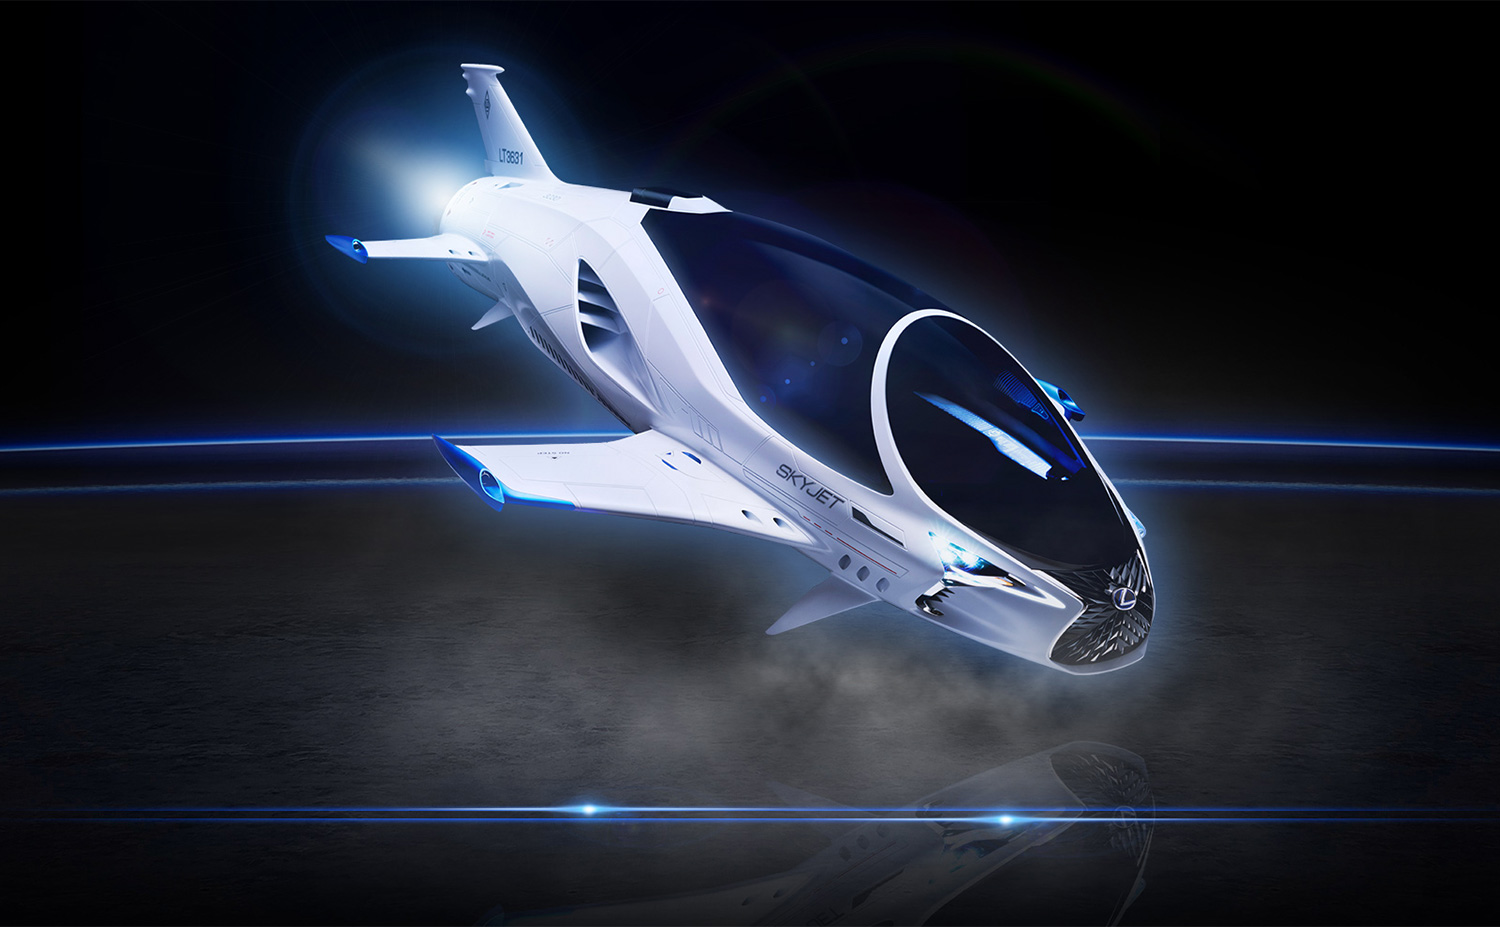 EXPLORE THE FEATURES OF THE SKYJET